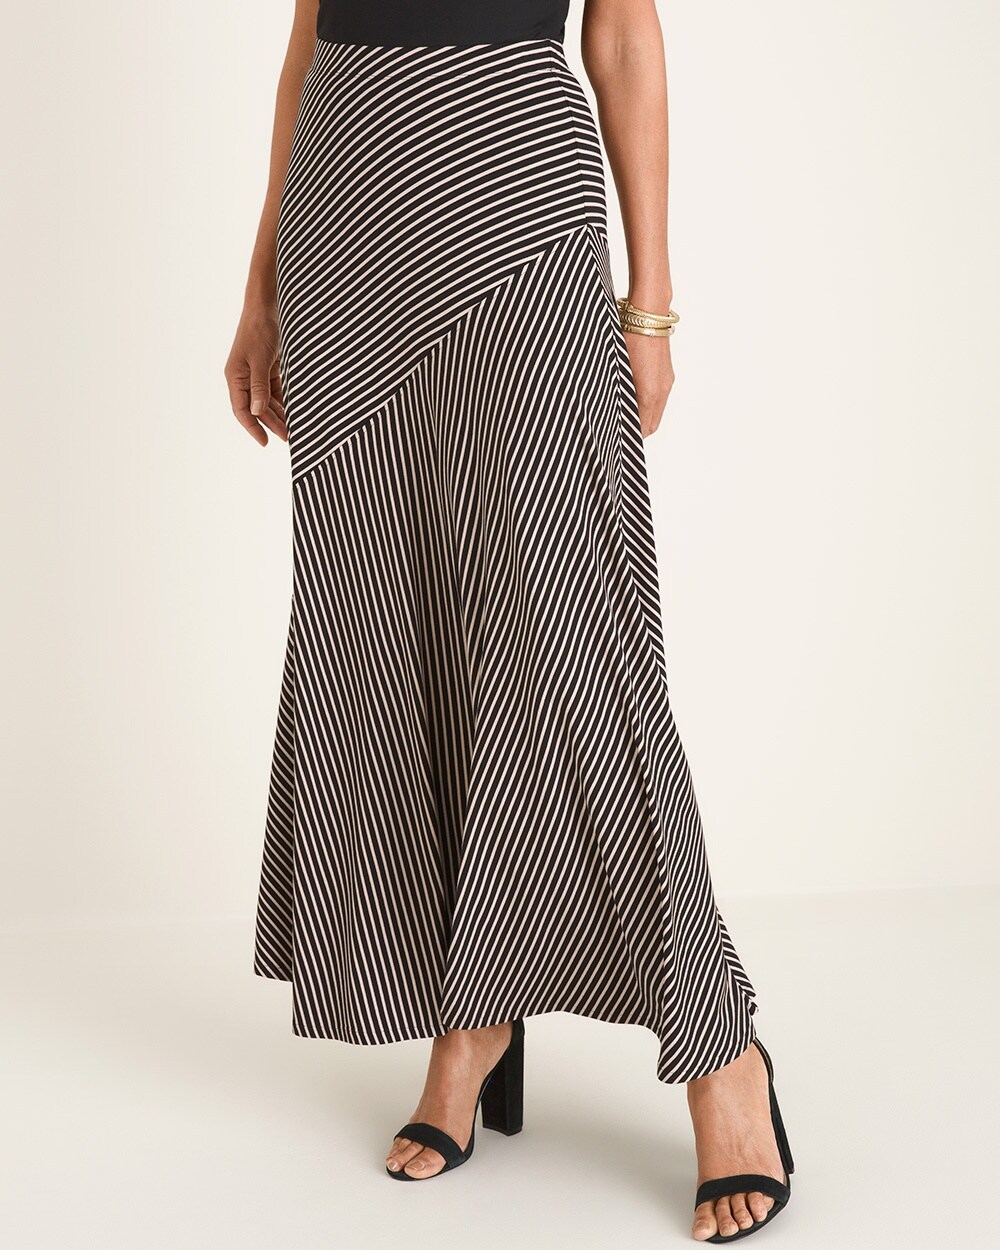 Black and Neutral Striped Maxi Skirt